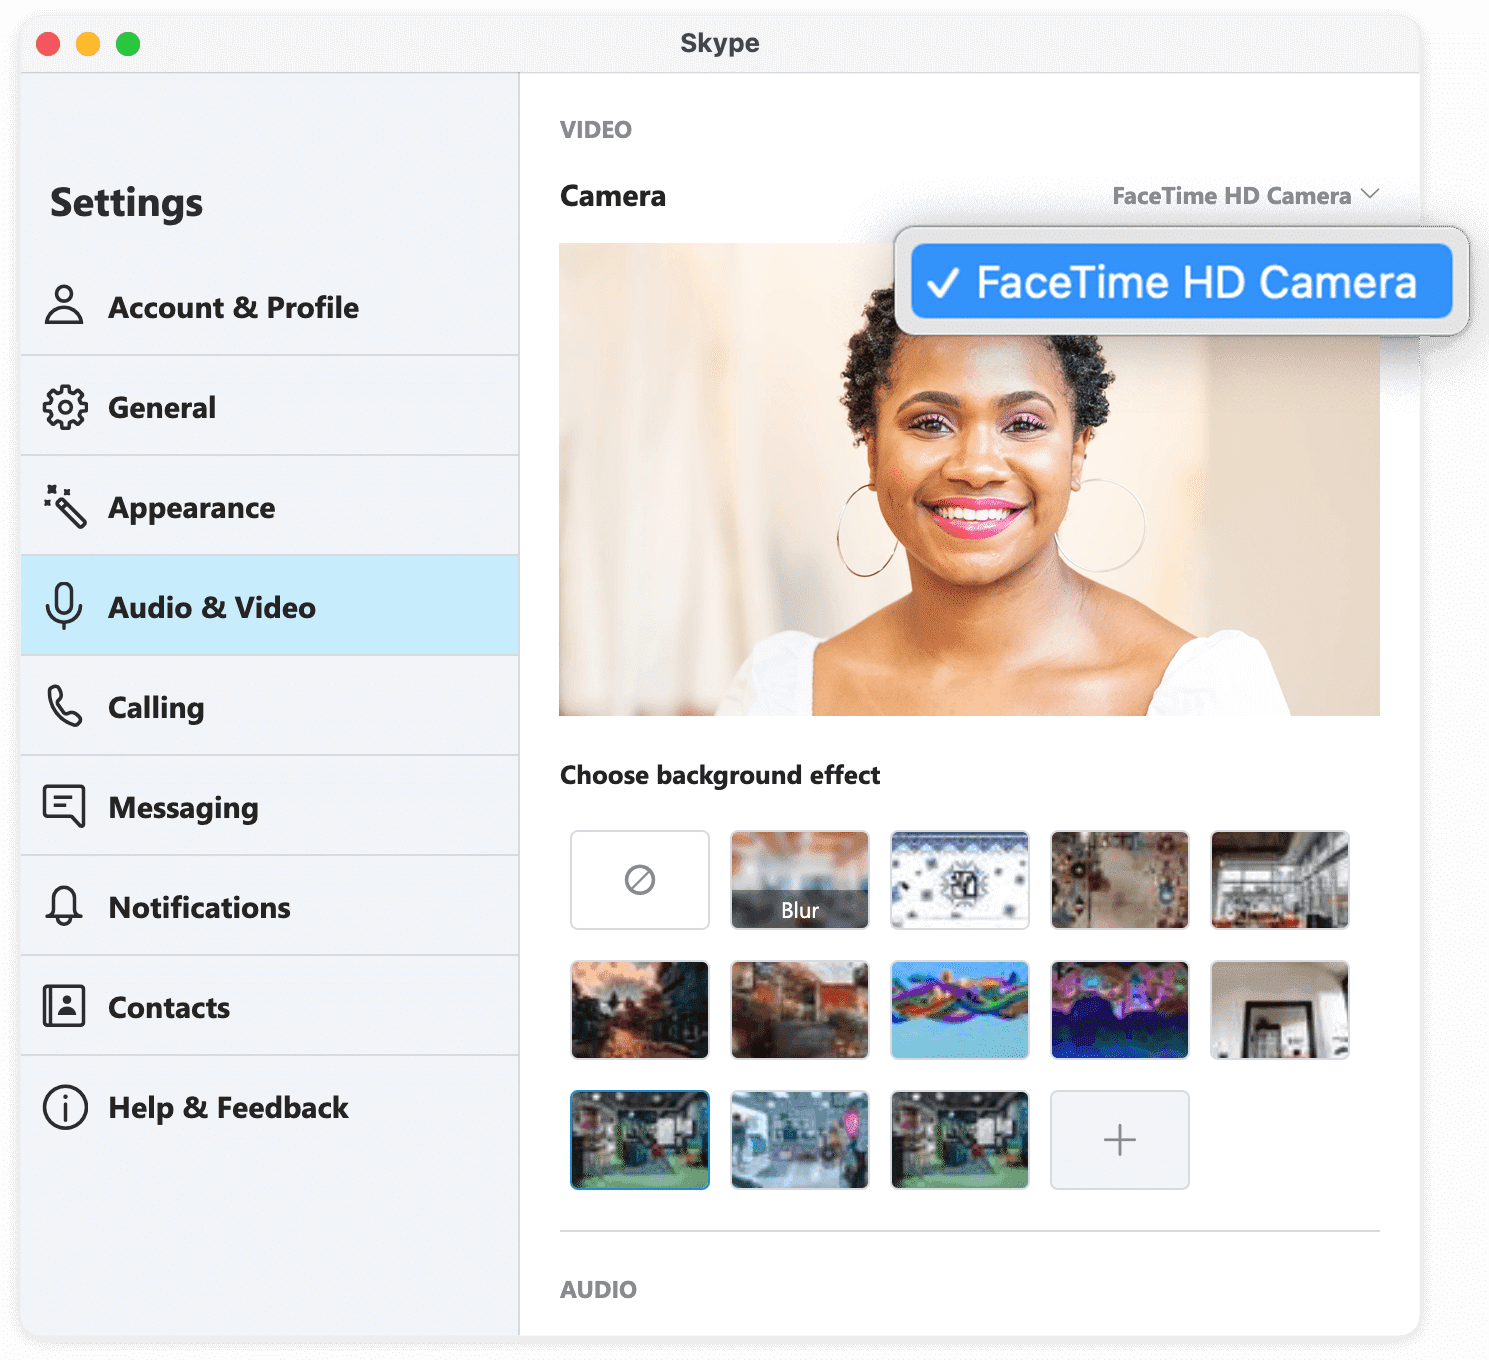 skype preferences video showing camera settings